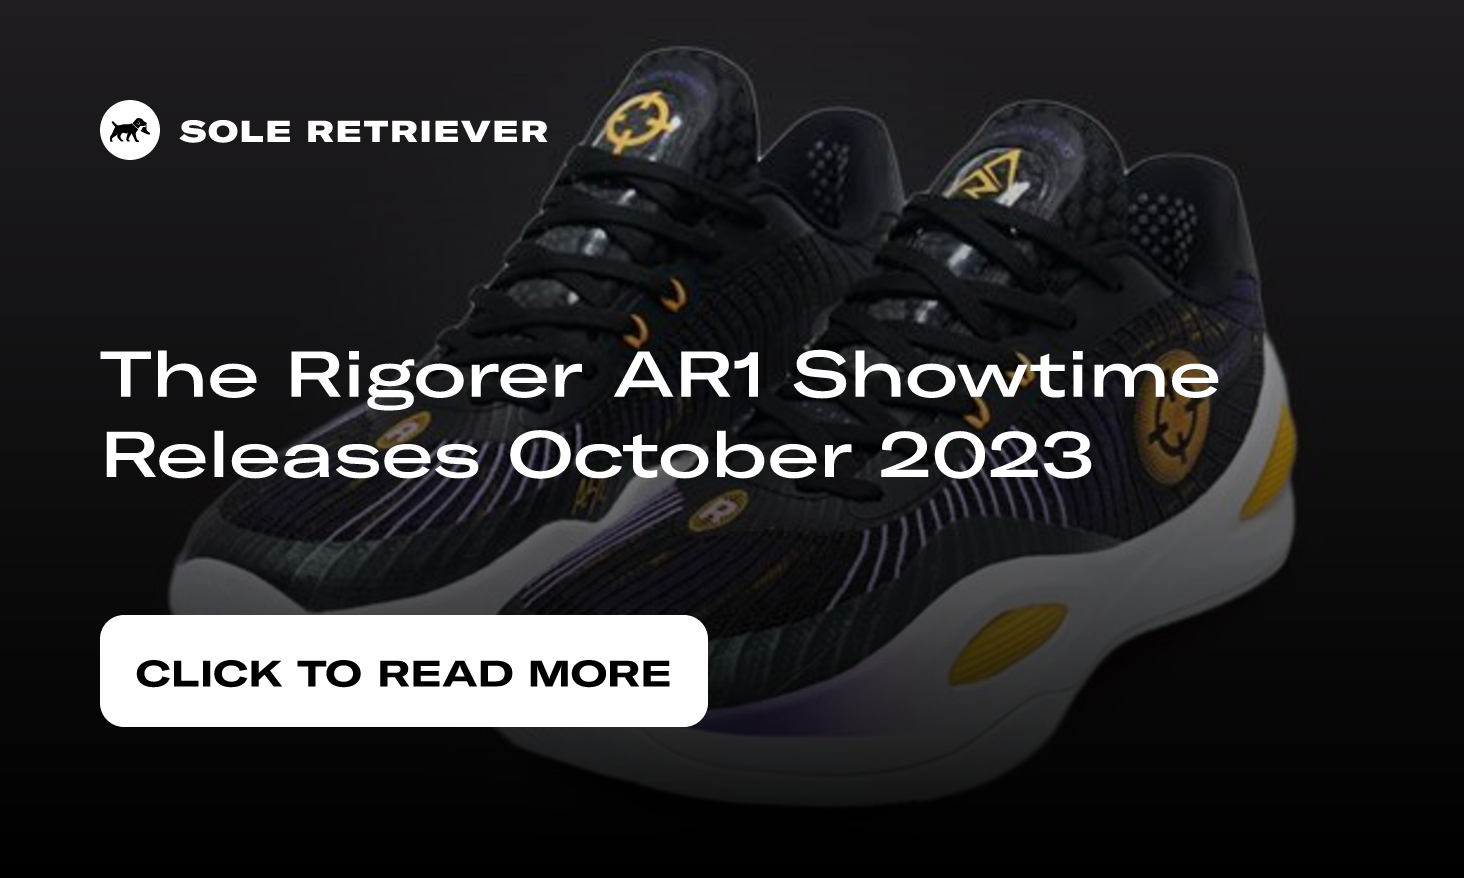 The Rigorer AR1 Showtime will be released at 11 a.m. EST / 8